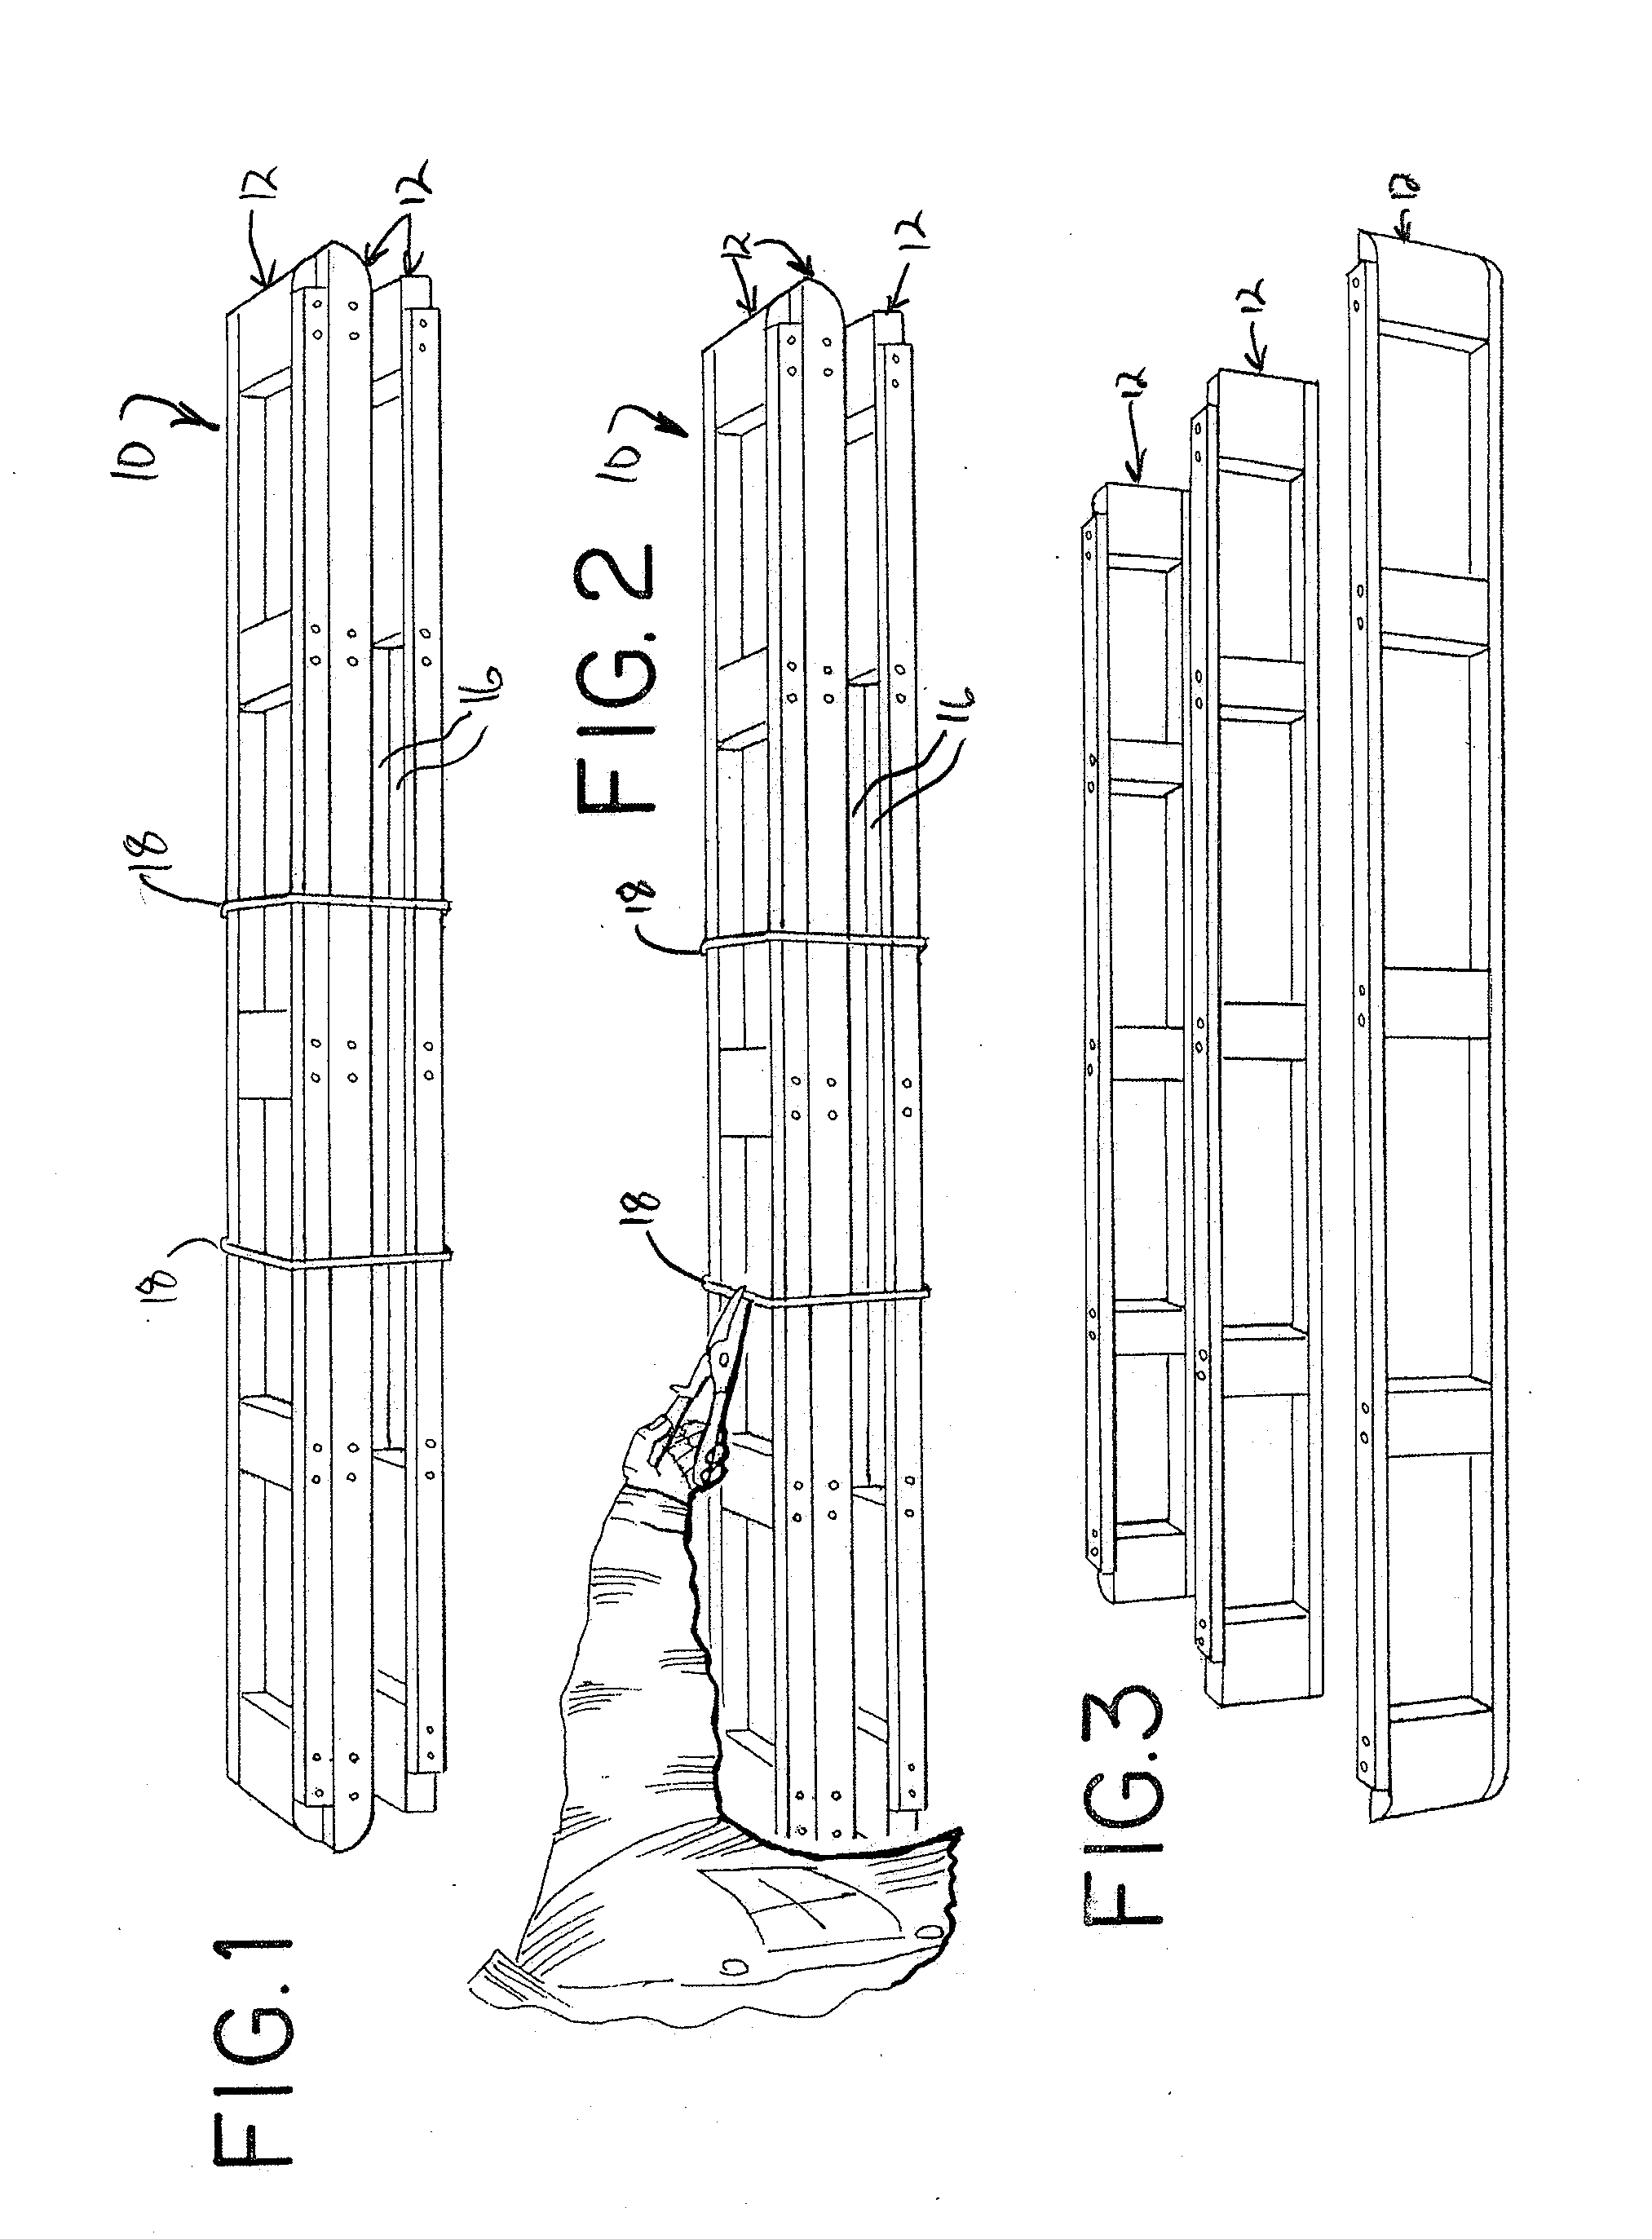 Compact foundation unit kit and method of making same